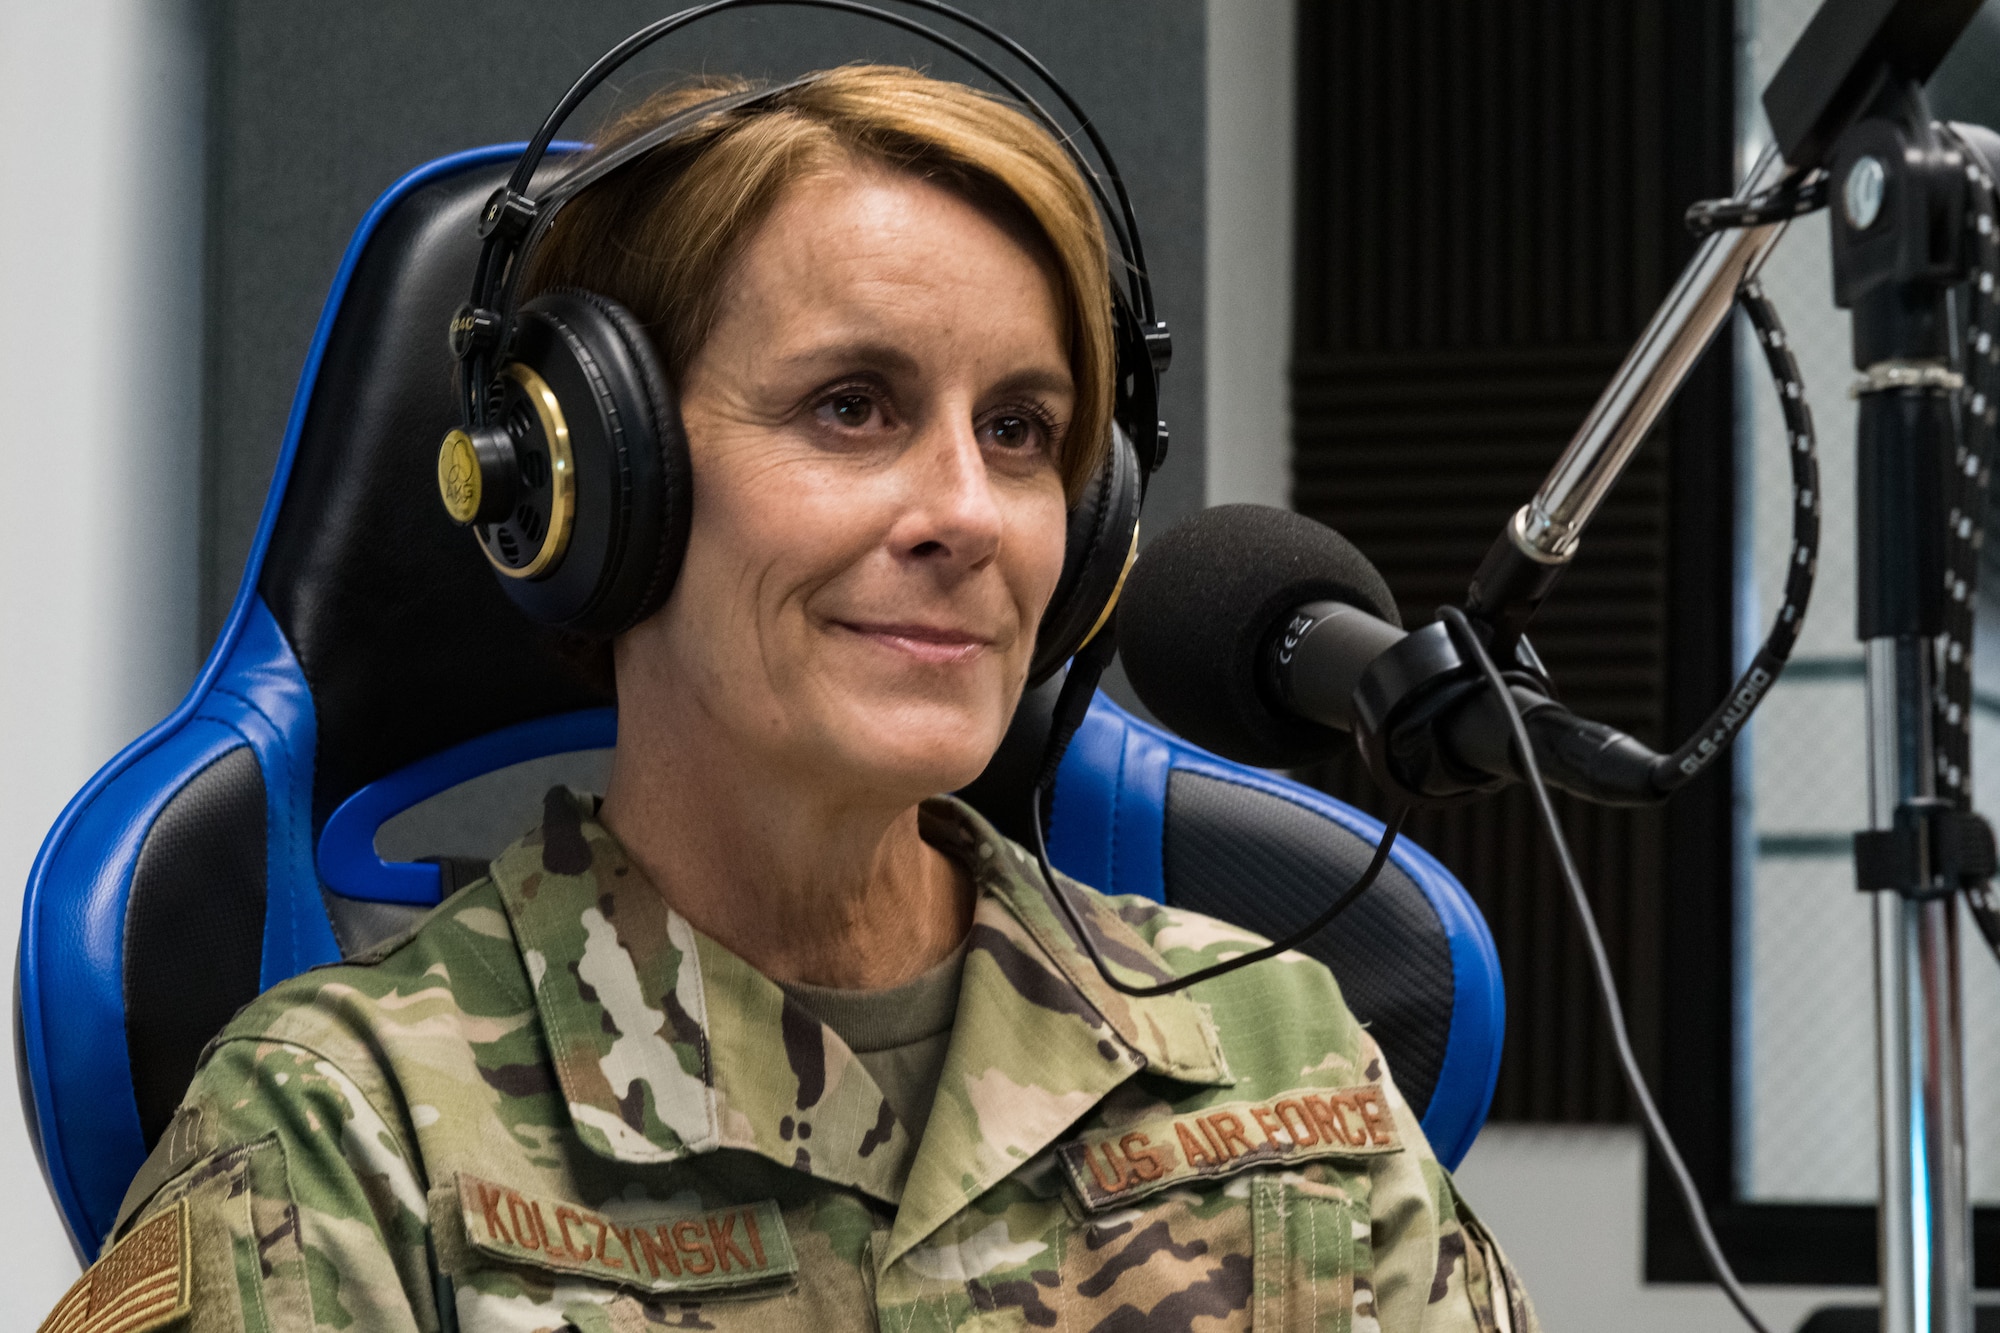 Chief Master Sgt. Dawn Kolczynski, U.S. Air Force surgeon general chief of medical operations, was a guest speaker for a podcast from Dover’s Bedrock Innovation Lab, June 26, 2020, at Dover Air Force Base, Delaware. Kolczynski talked to podcast listeners about innovation and leadership, along with Lt. Gen. Dorothy Hogg, U.S. Air Force surgeon general. (U.S. Air Force photo by Roland Balik)